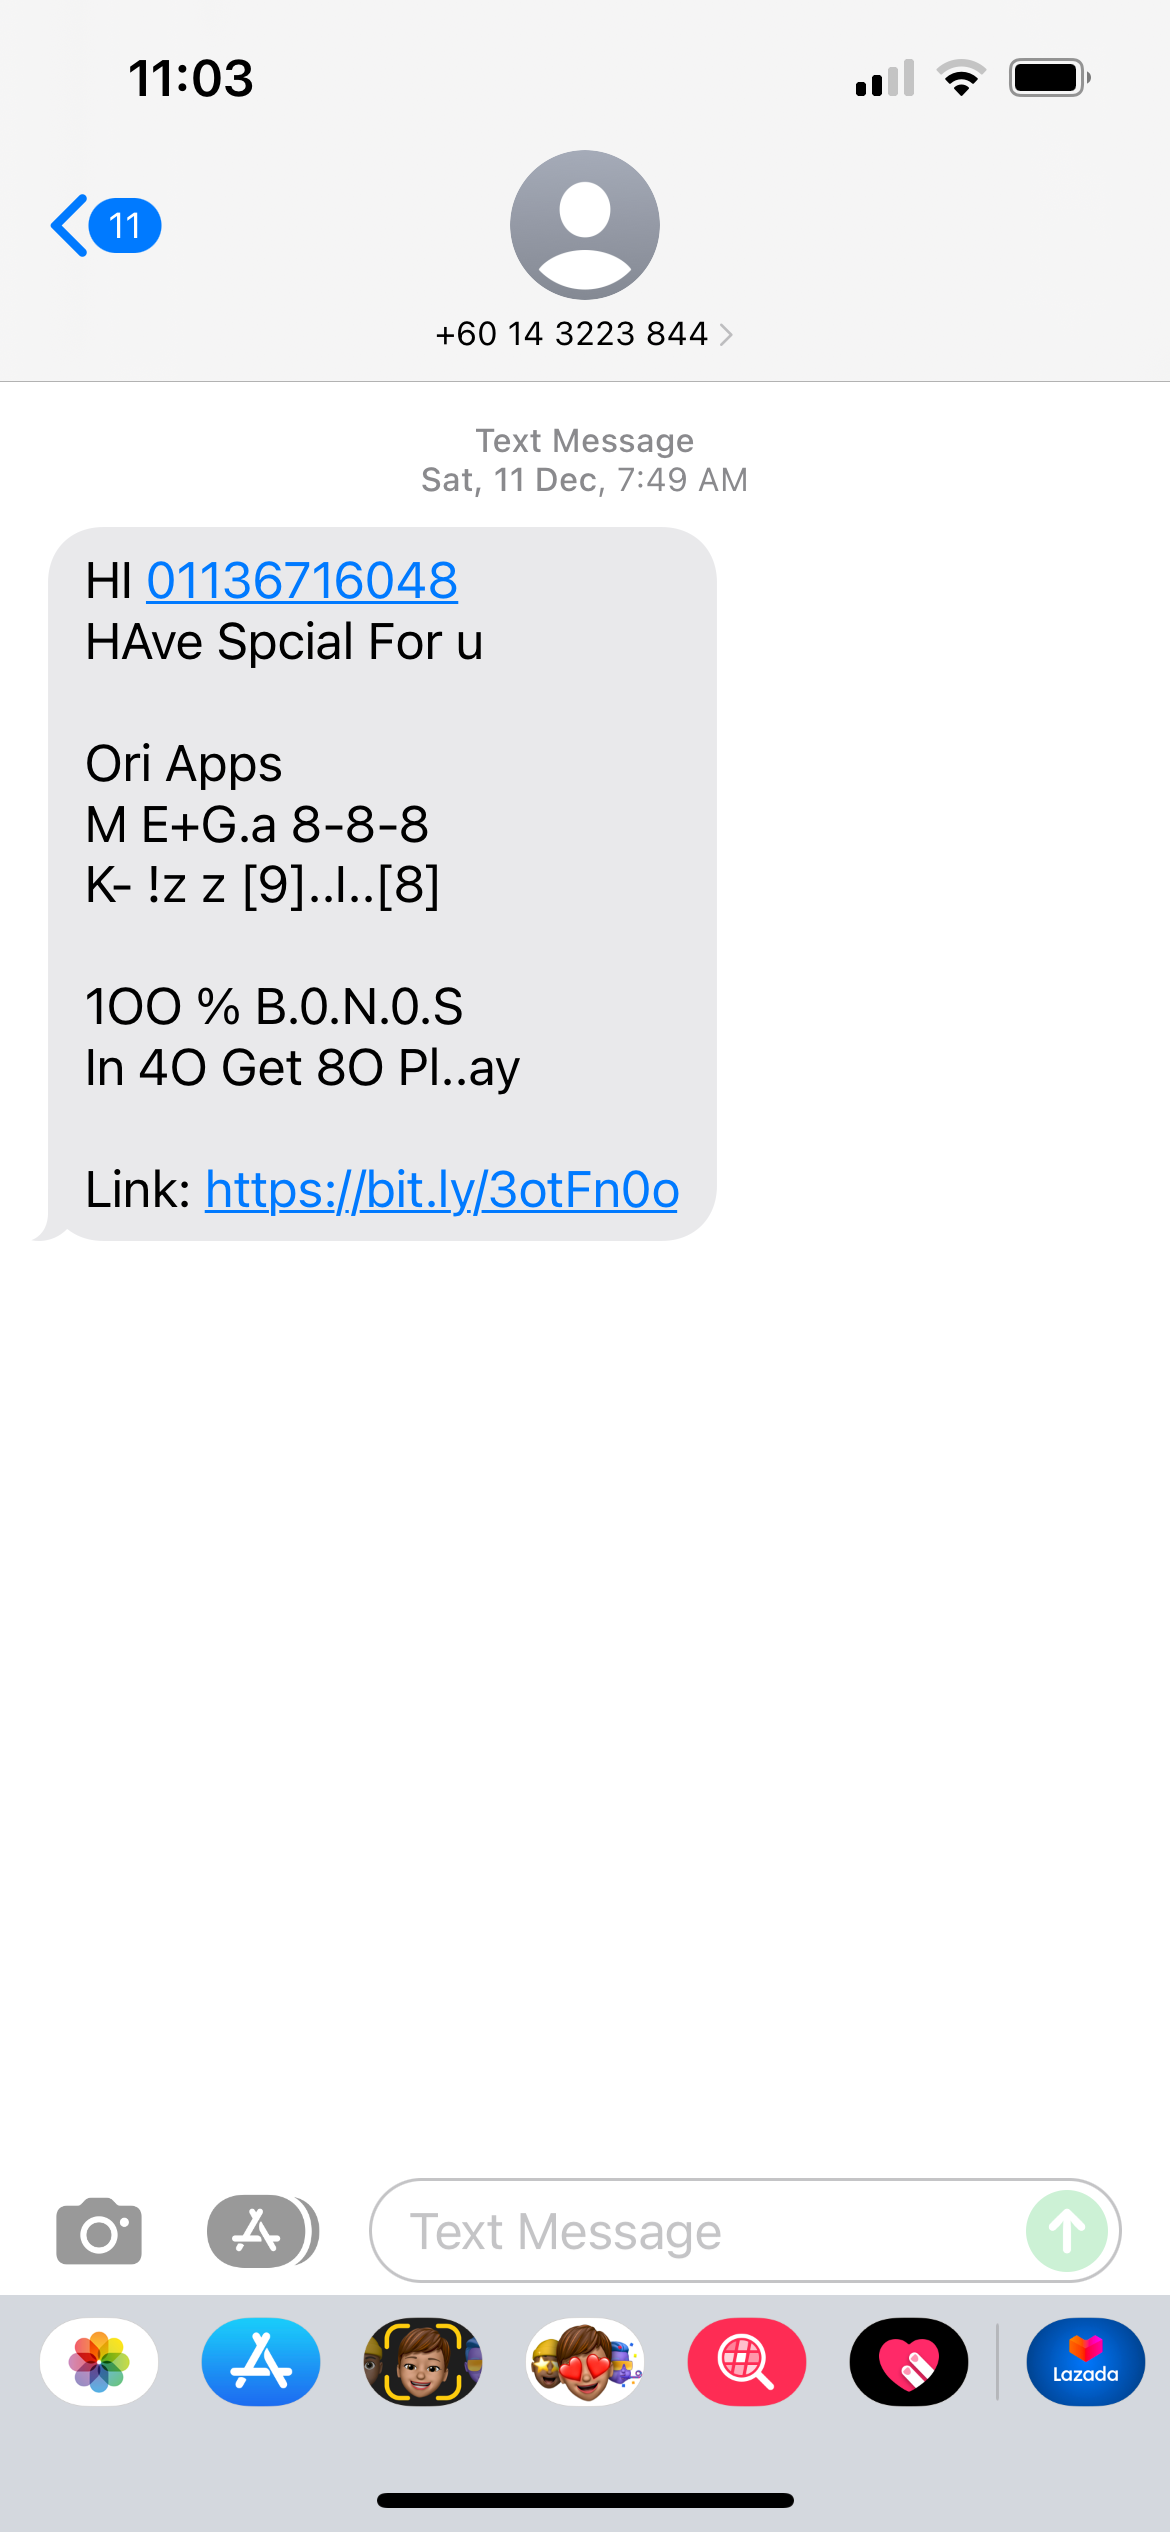 spam message on iphone messages